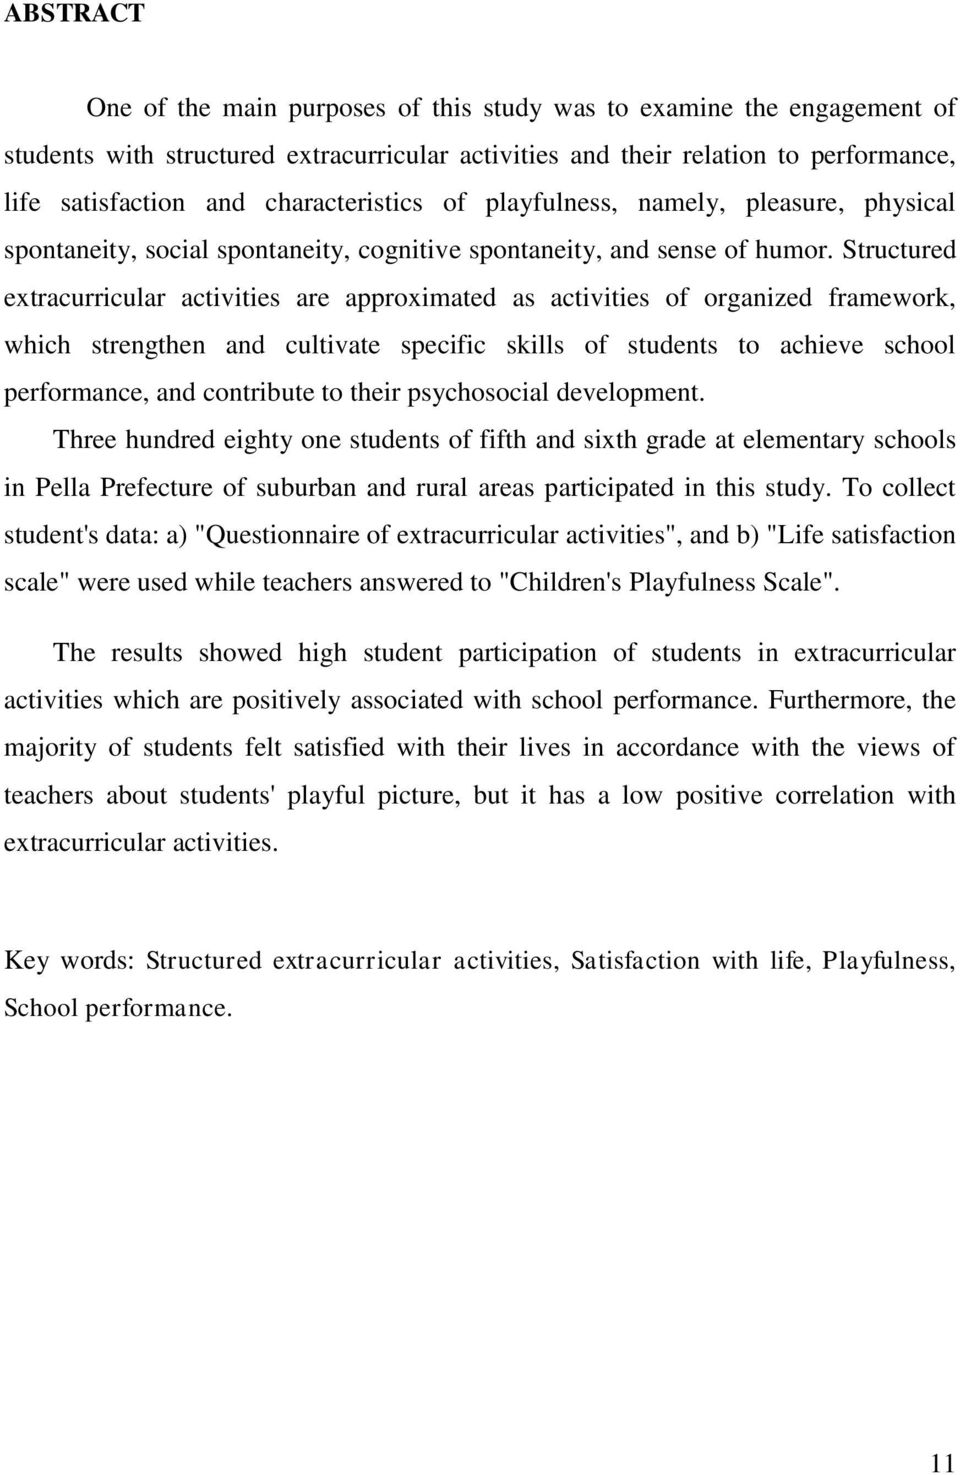 Structured extracurricular activities are approximated as activities of organized framework, which strengthen and cultivate specific skills of students to achieve school performance, and contribute